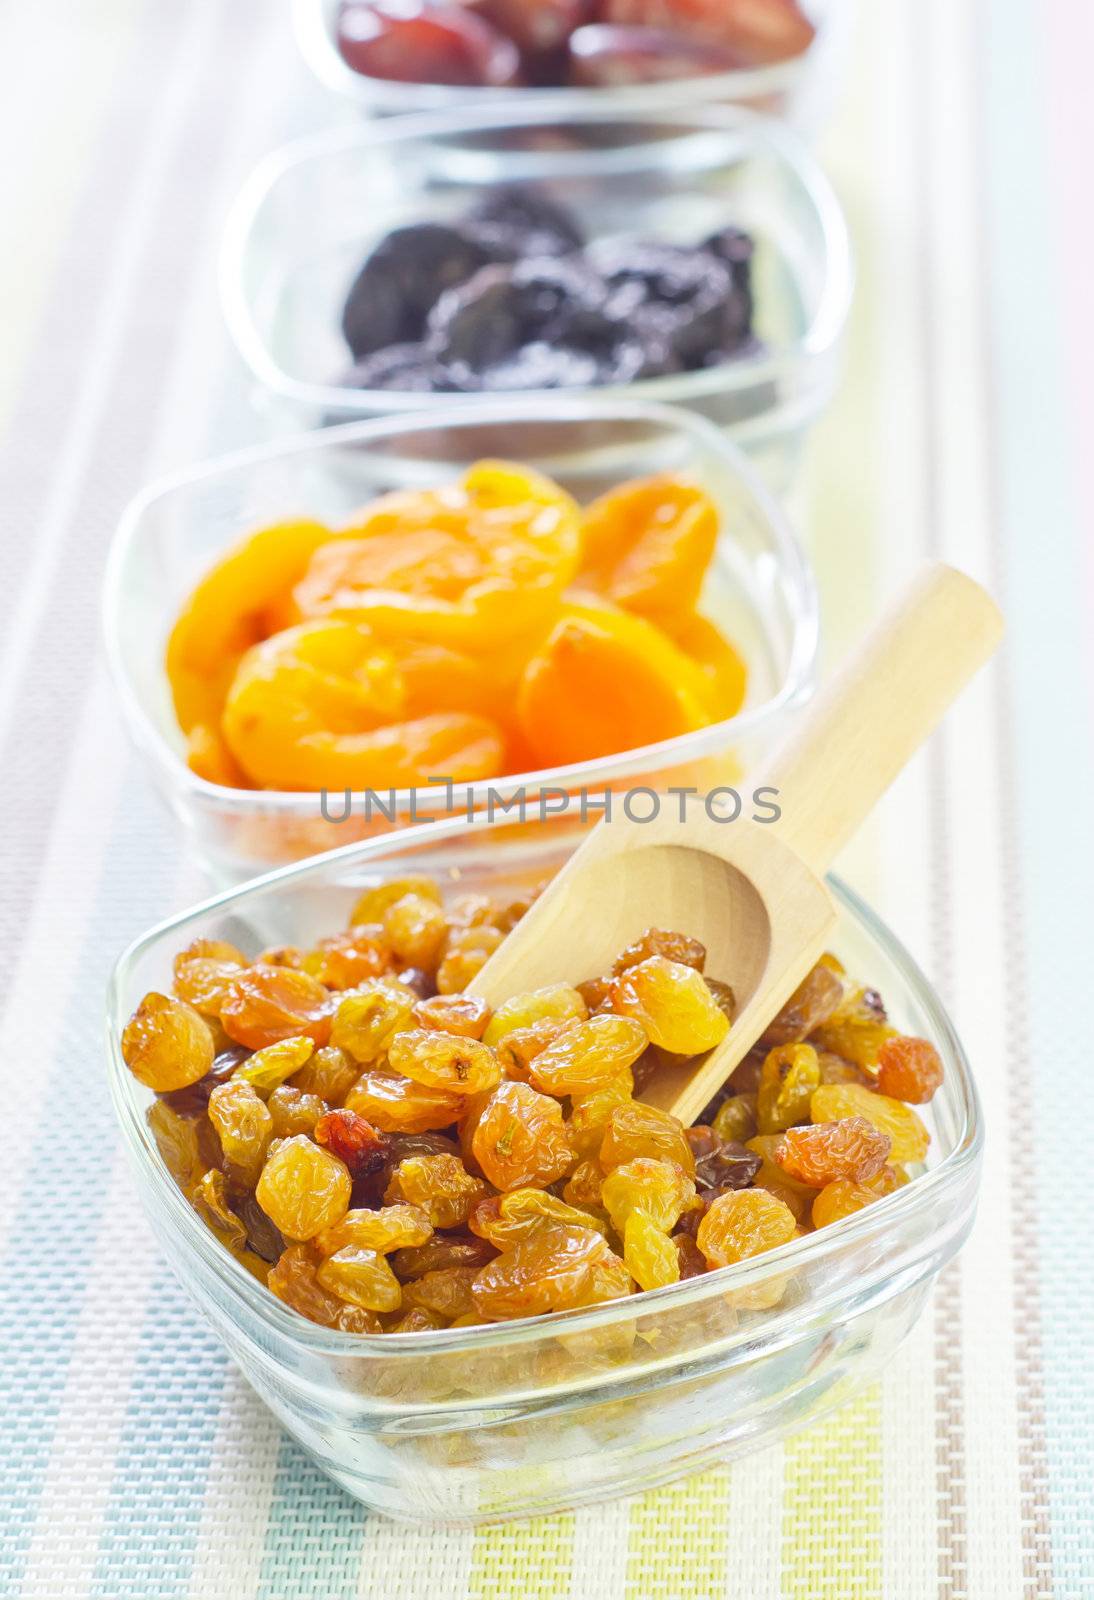 dried apricots, raisins and dates by tycoon